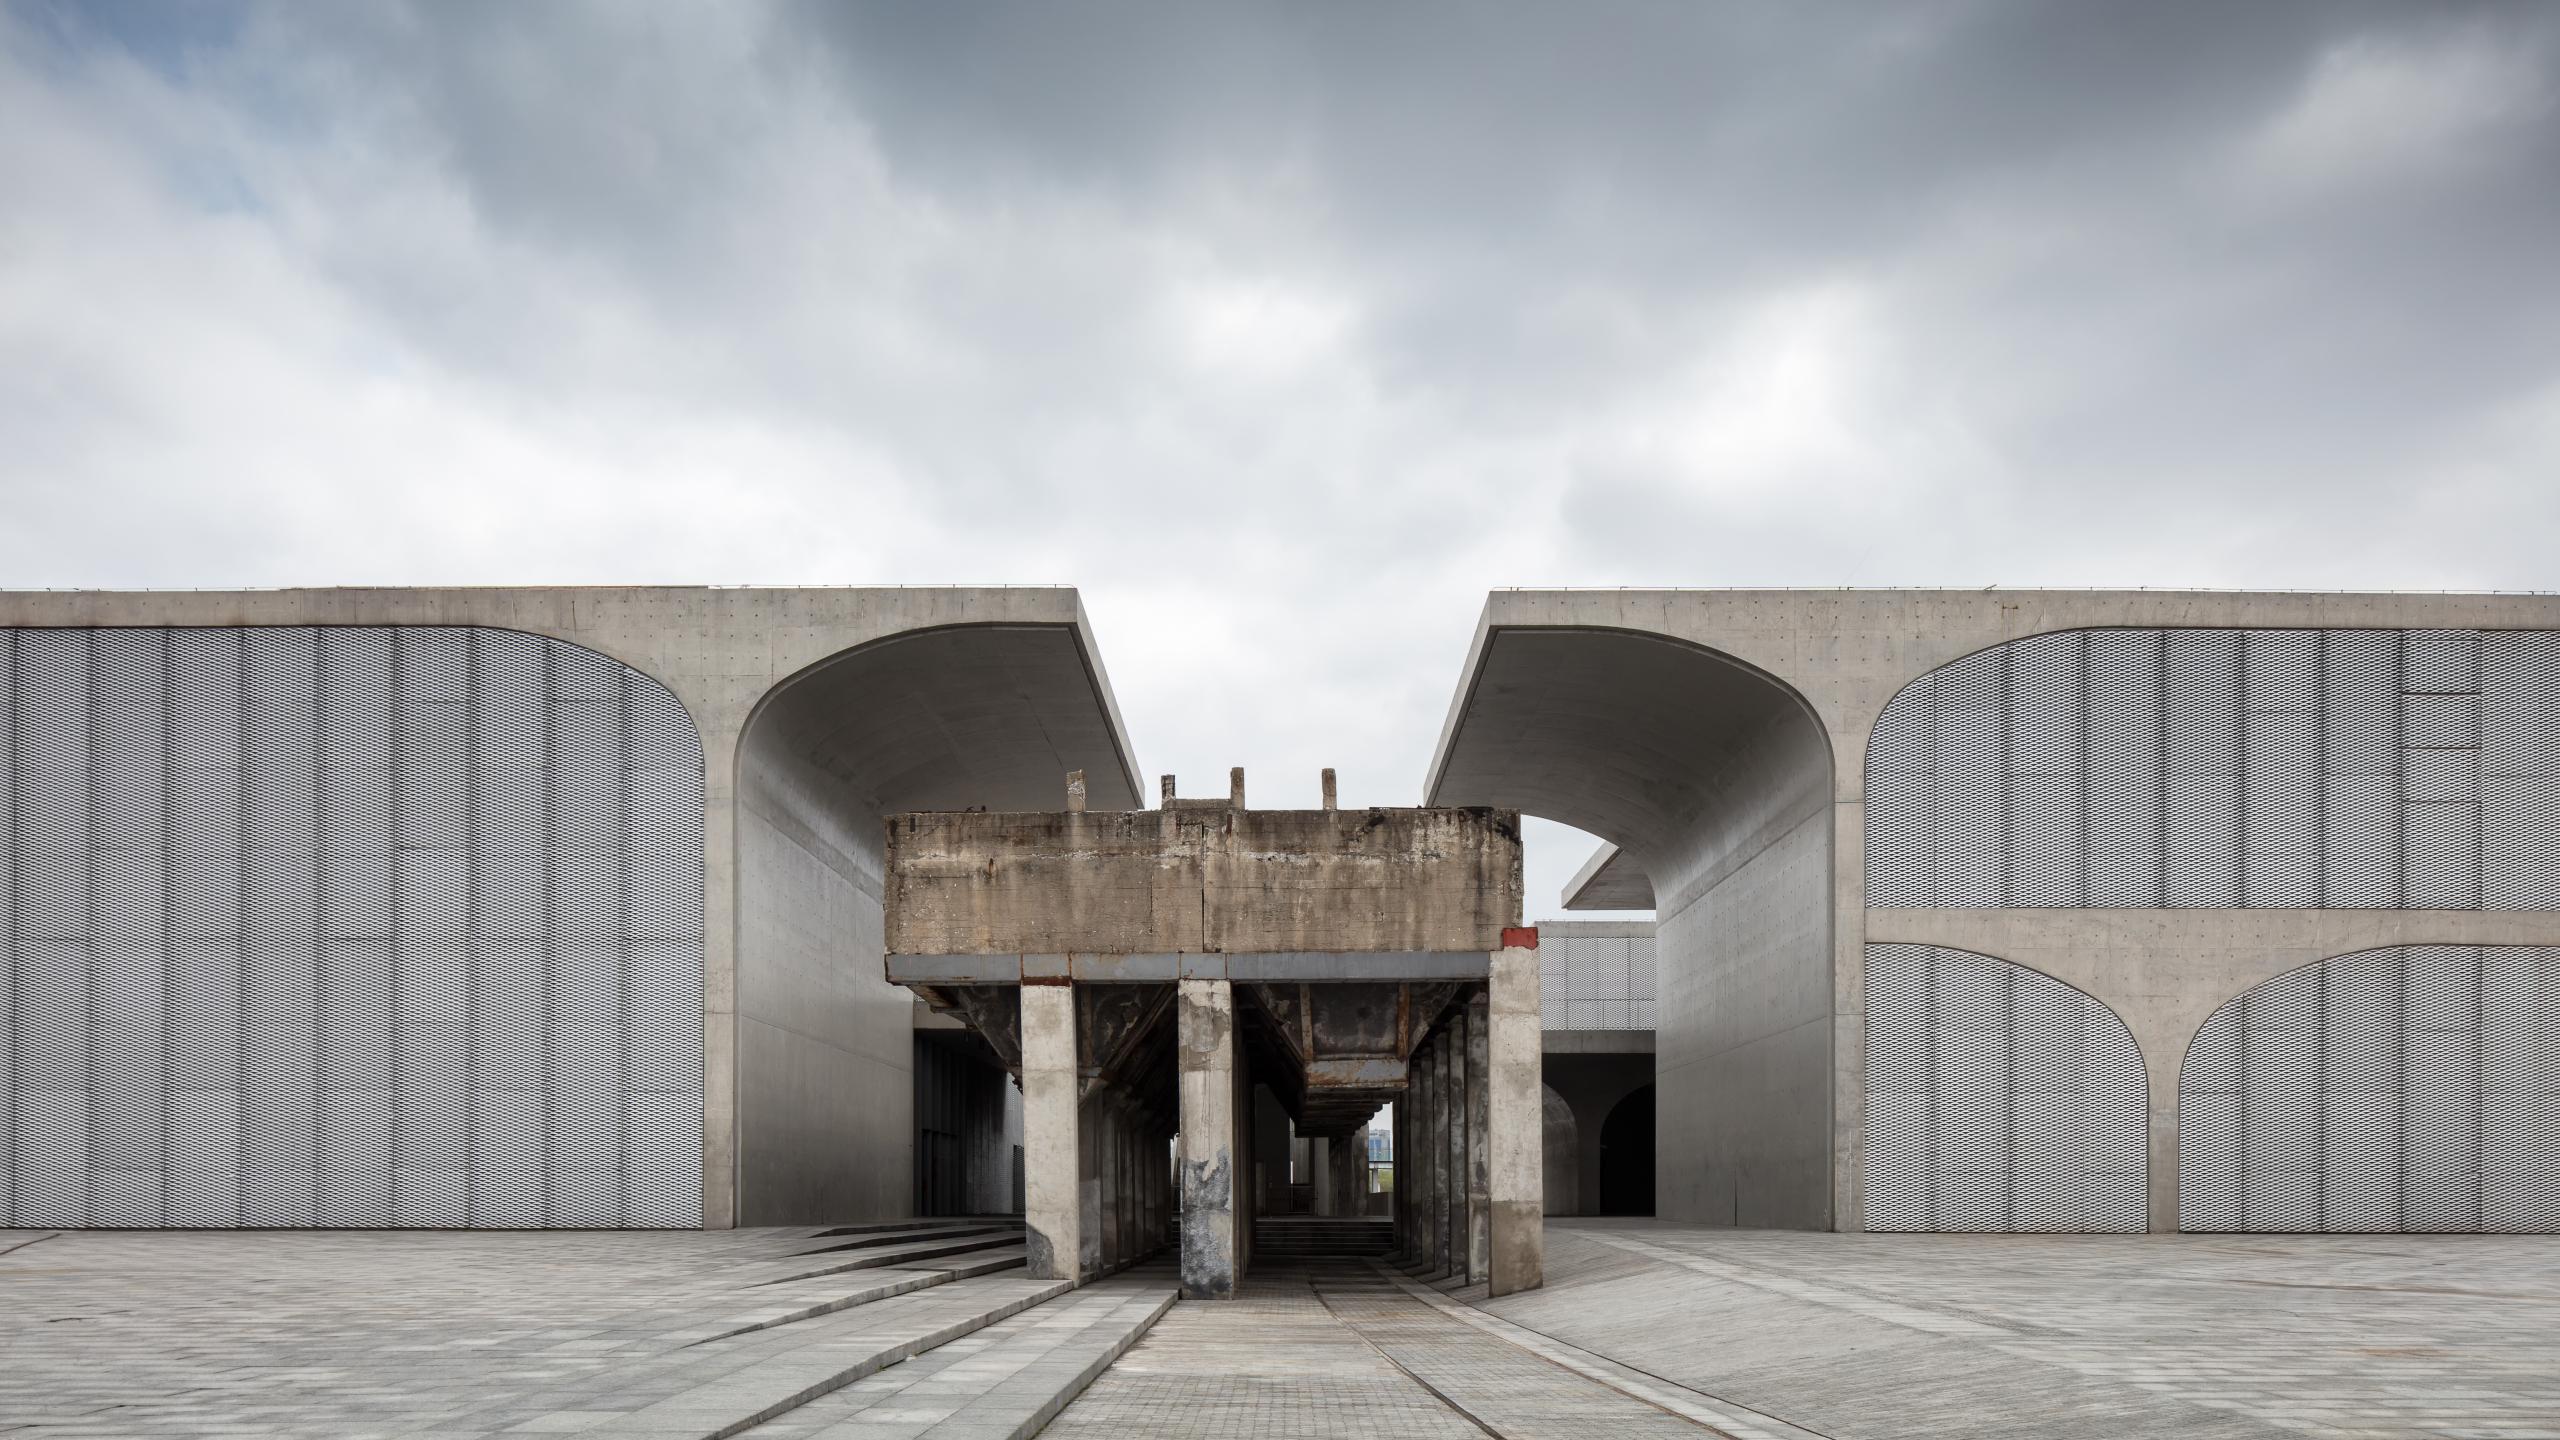 Photograph of Long Museum West Bund, designed by Atelier Deshaus and located in Shanghai, China